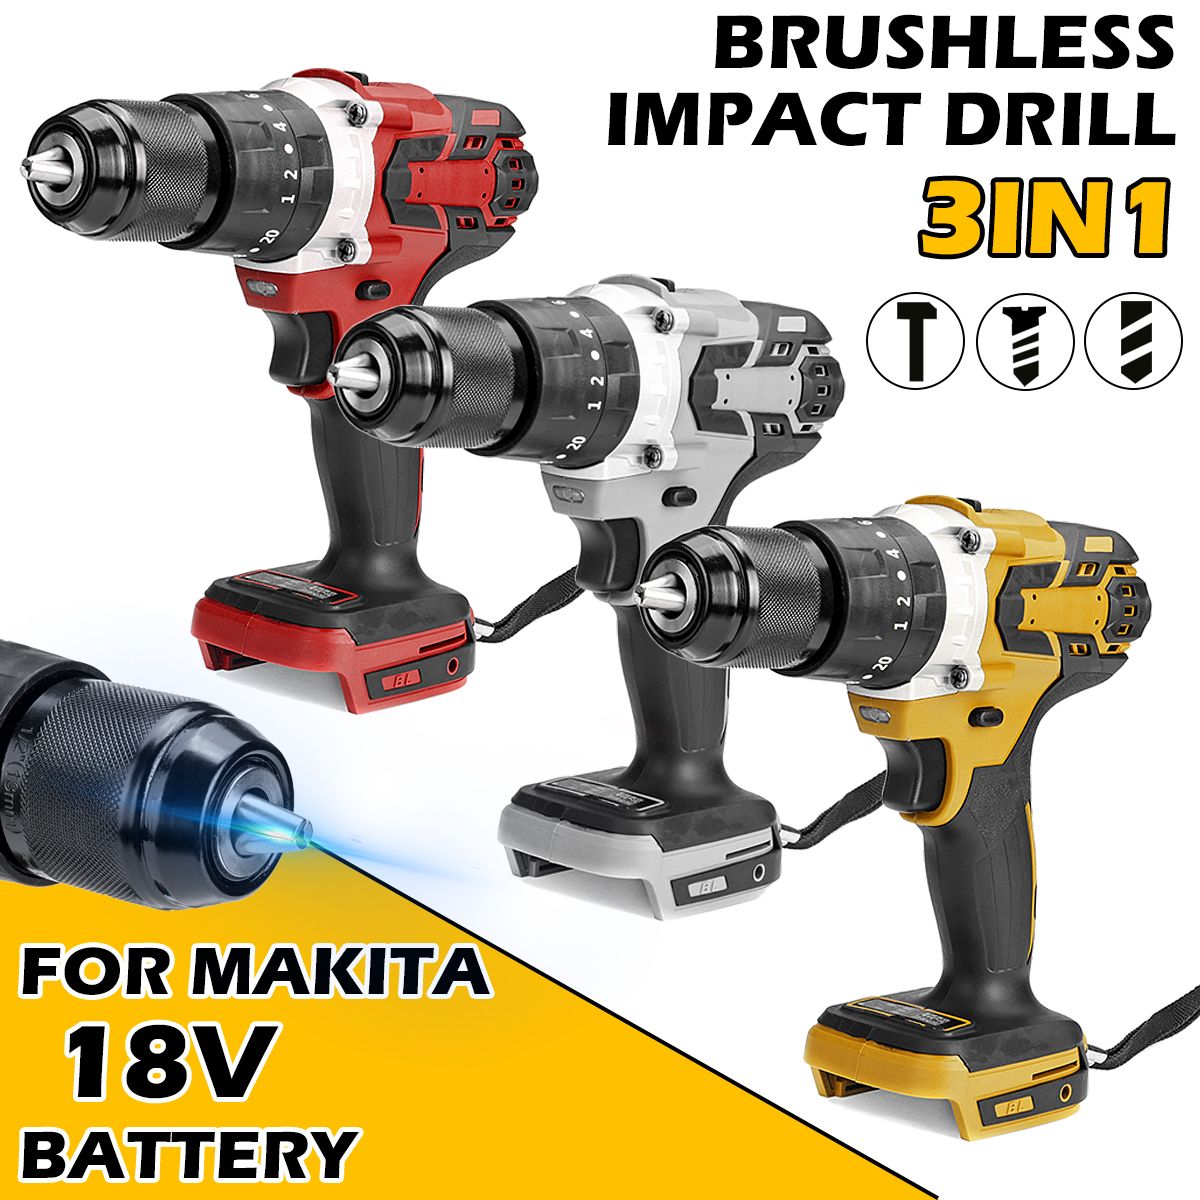 13mm-3-In-1-Brushless-Impact-Drill-Hammer-Cordless-Elctric-Hammer-Drill-Adapted-To-18V-Makita-Batter-1715080